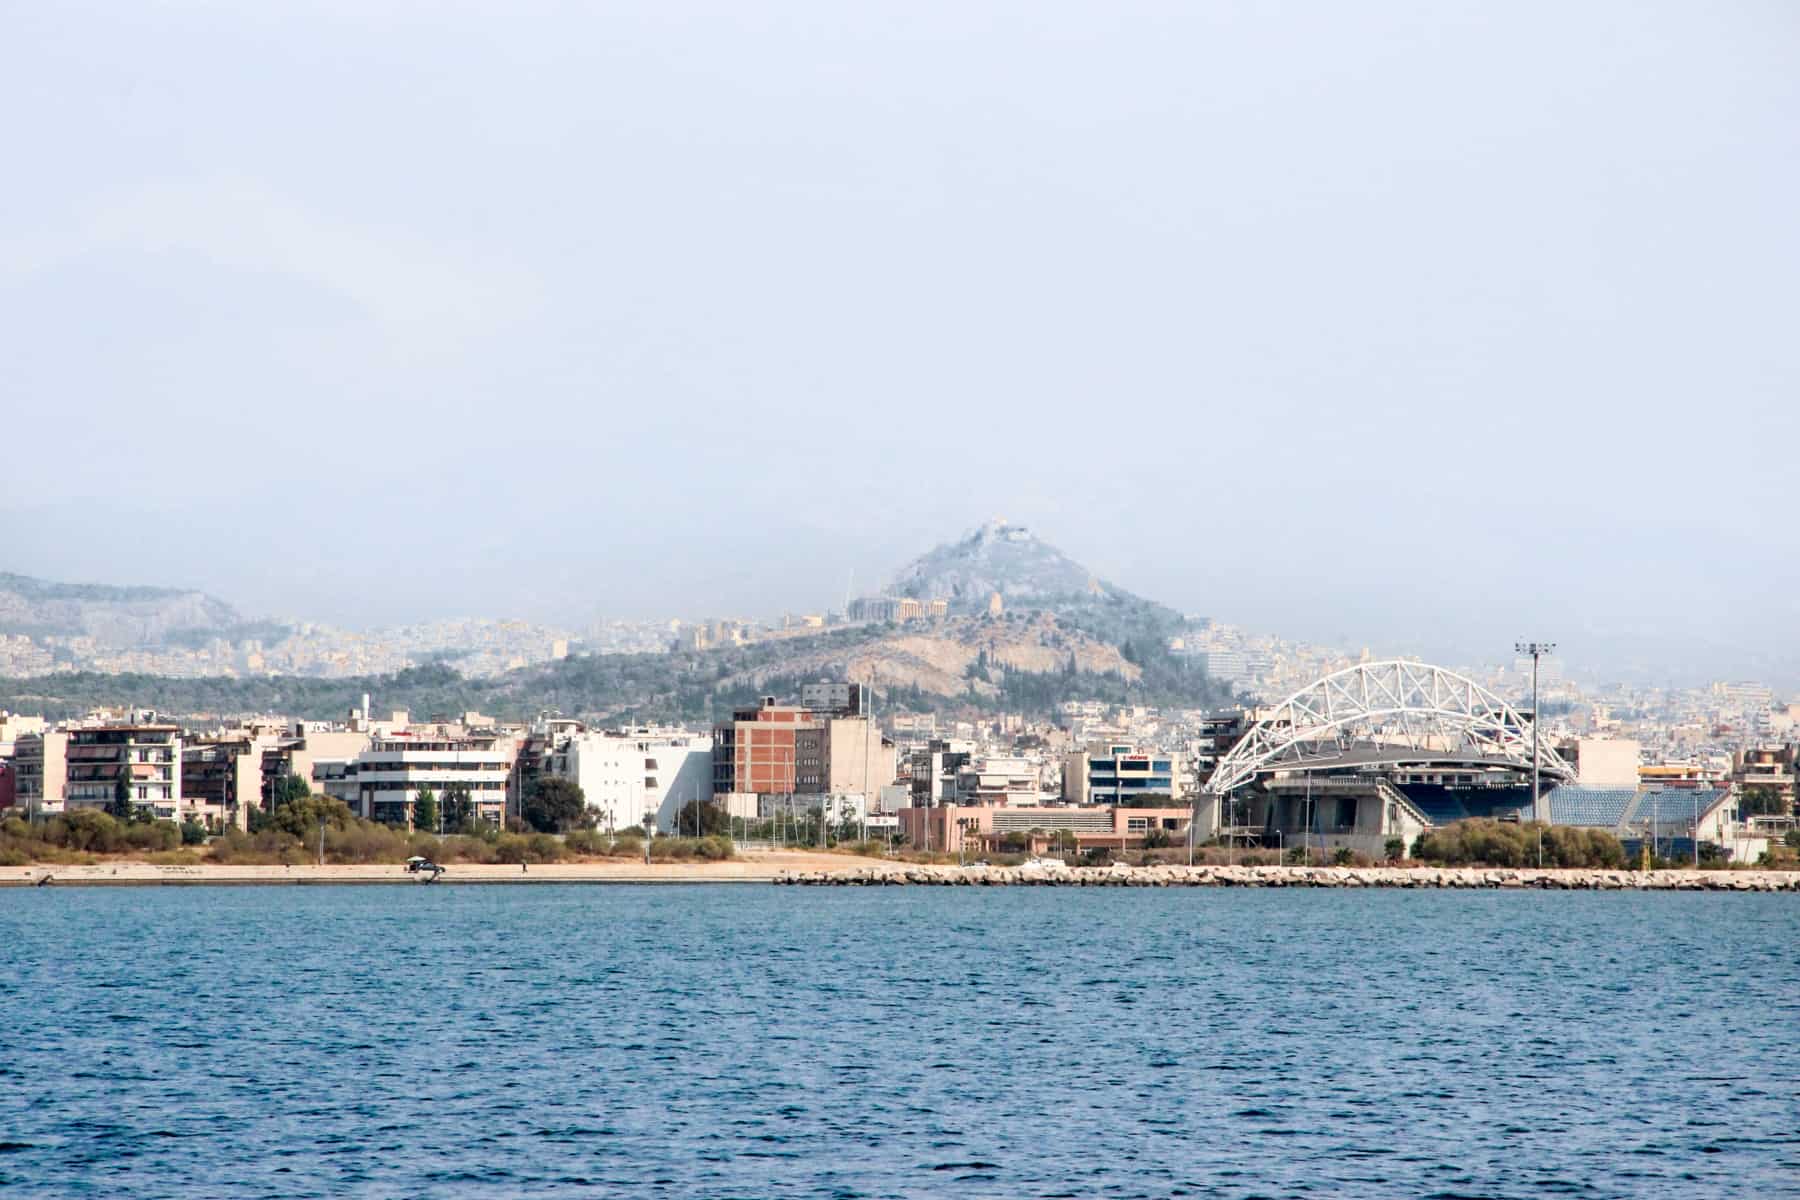 View from the sea of the Athens Riviera coastline filled with apartment buildings and a stadium with one of the city hills in the background.